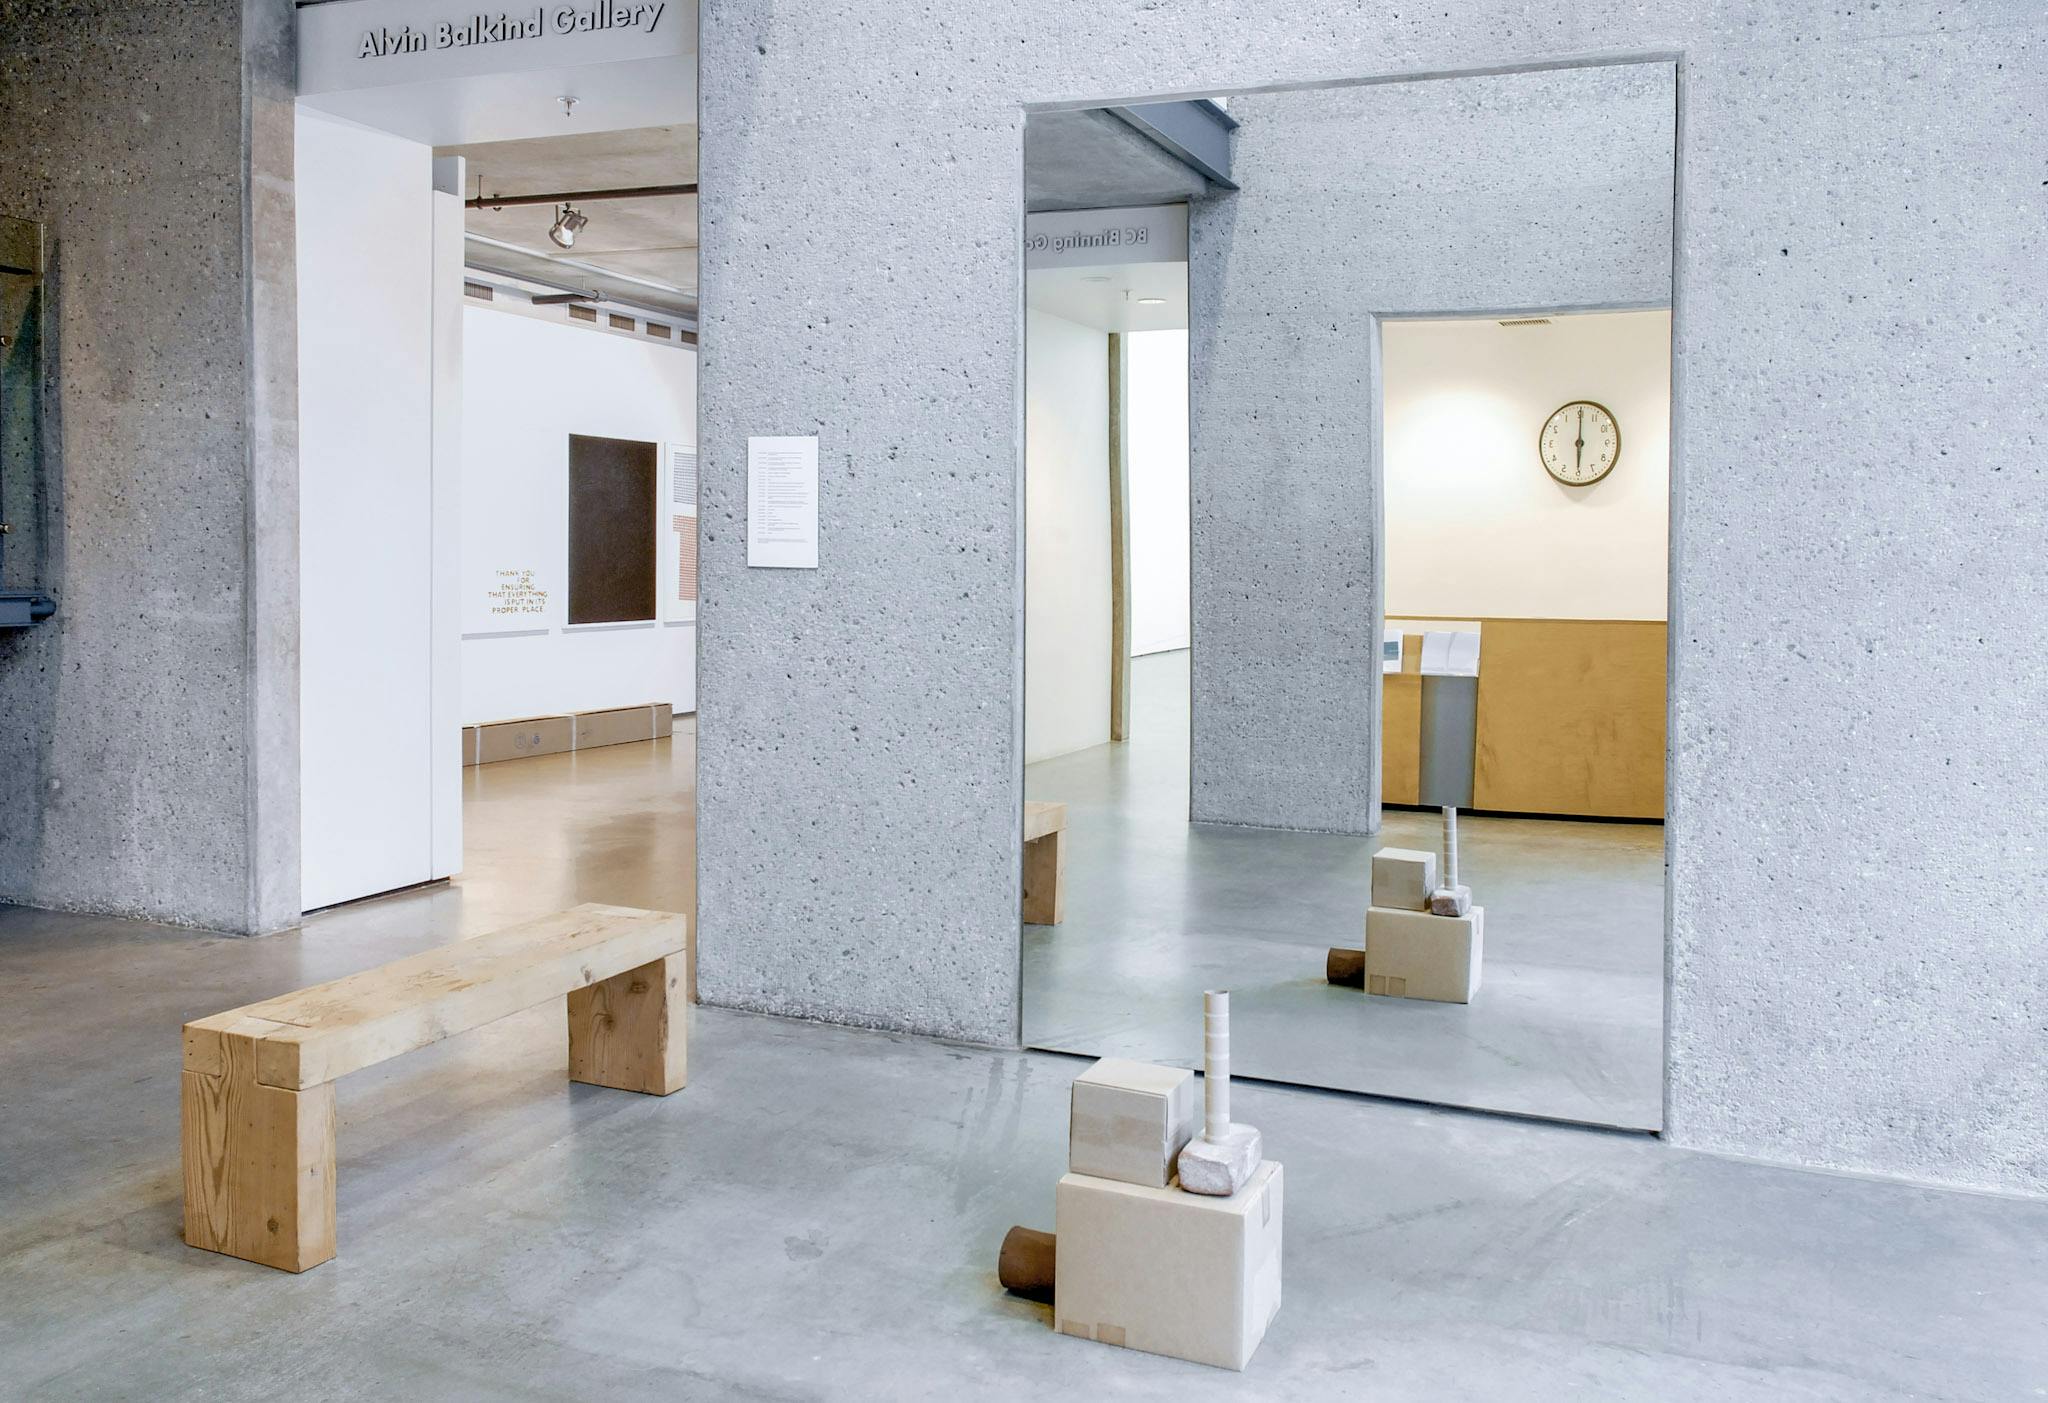 A large mirror is installed on the grey wall outside the Belkind Gallery. A wooden sculpture that looks like a stack of children’s toys is placed in front of that mirror. 